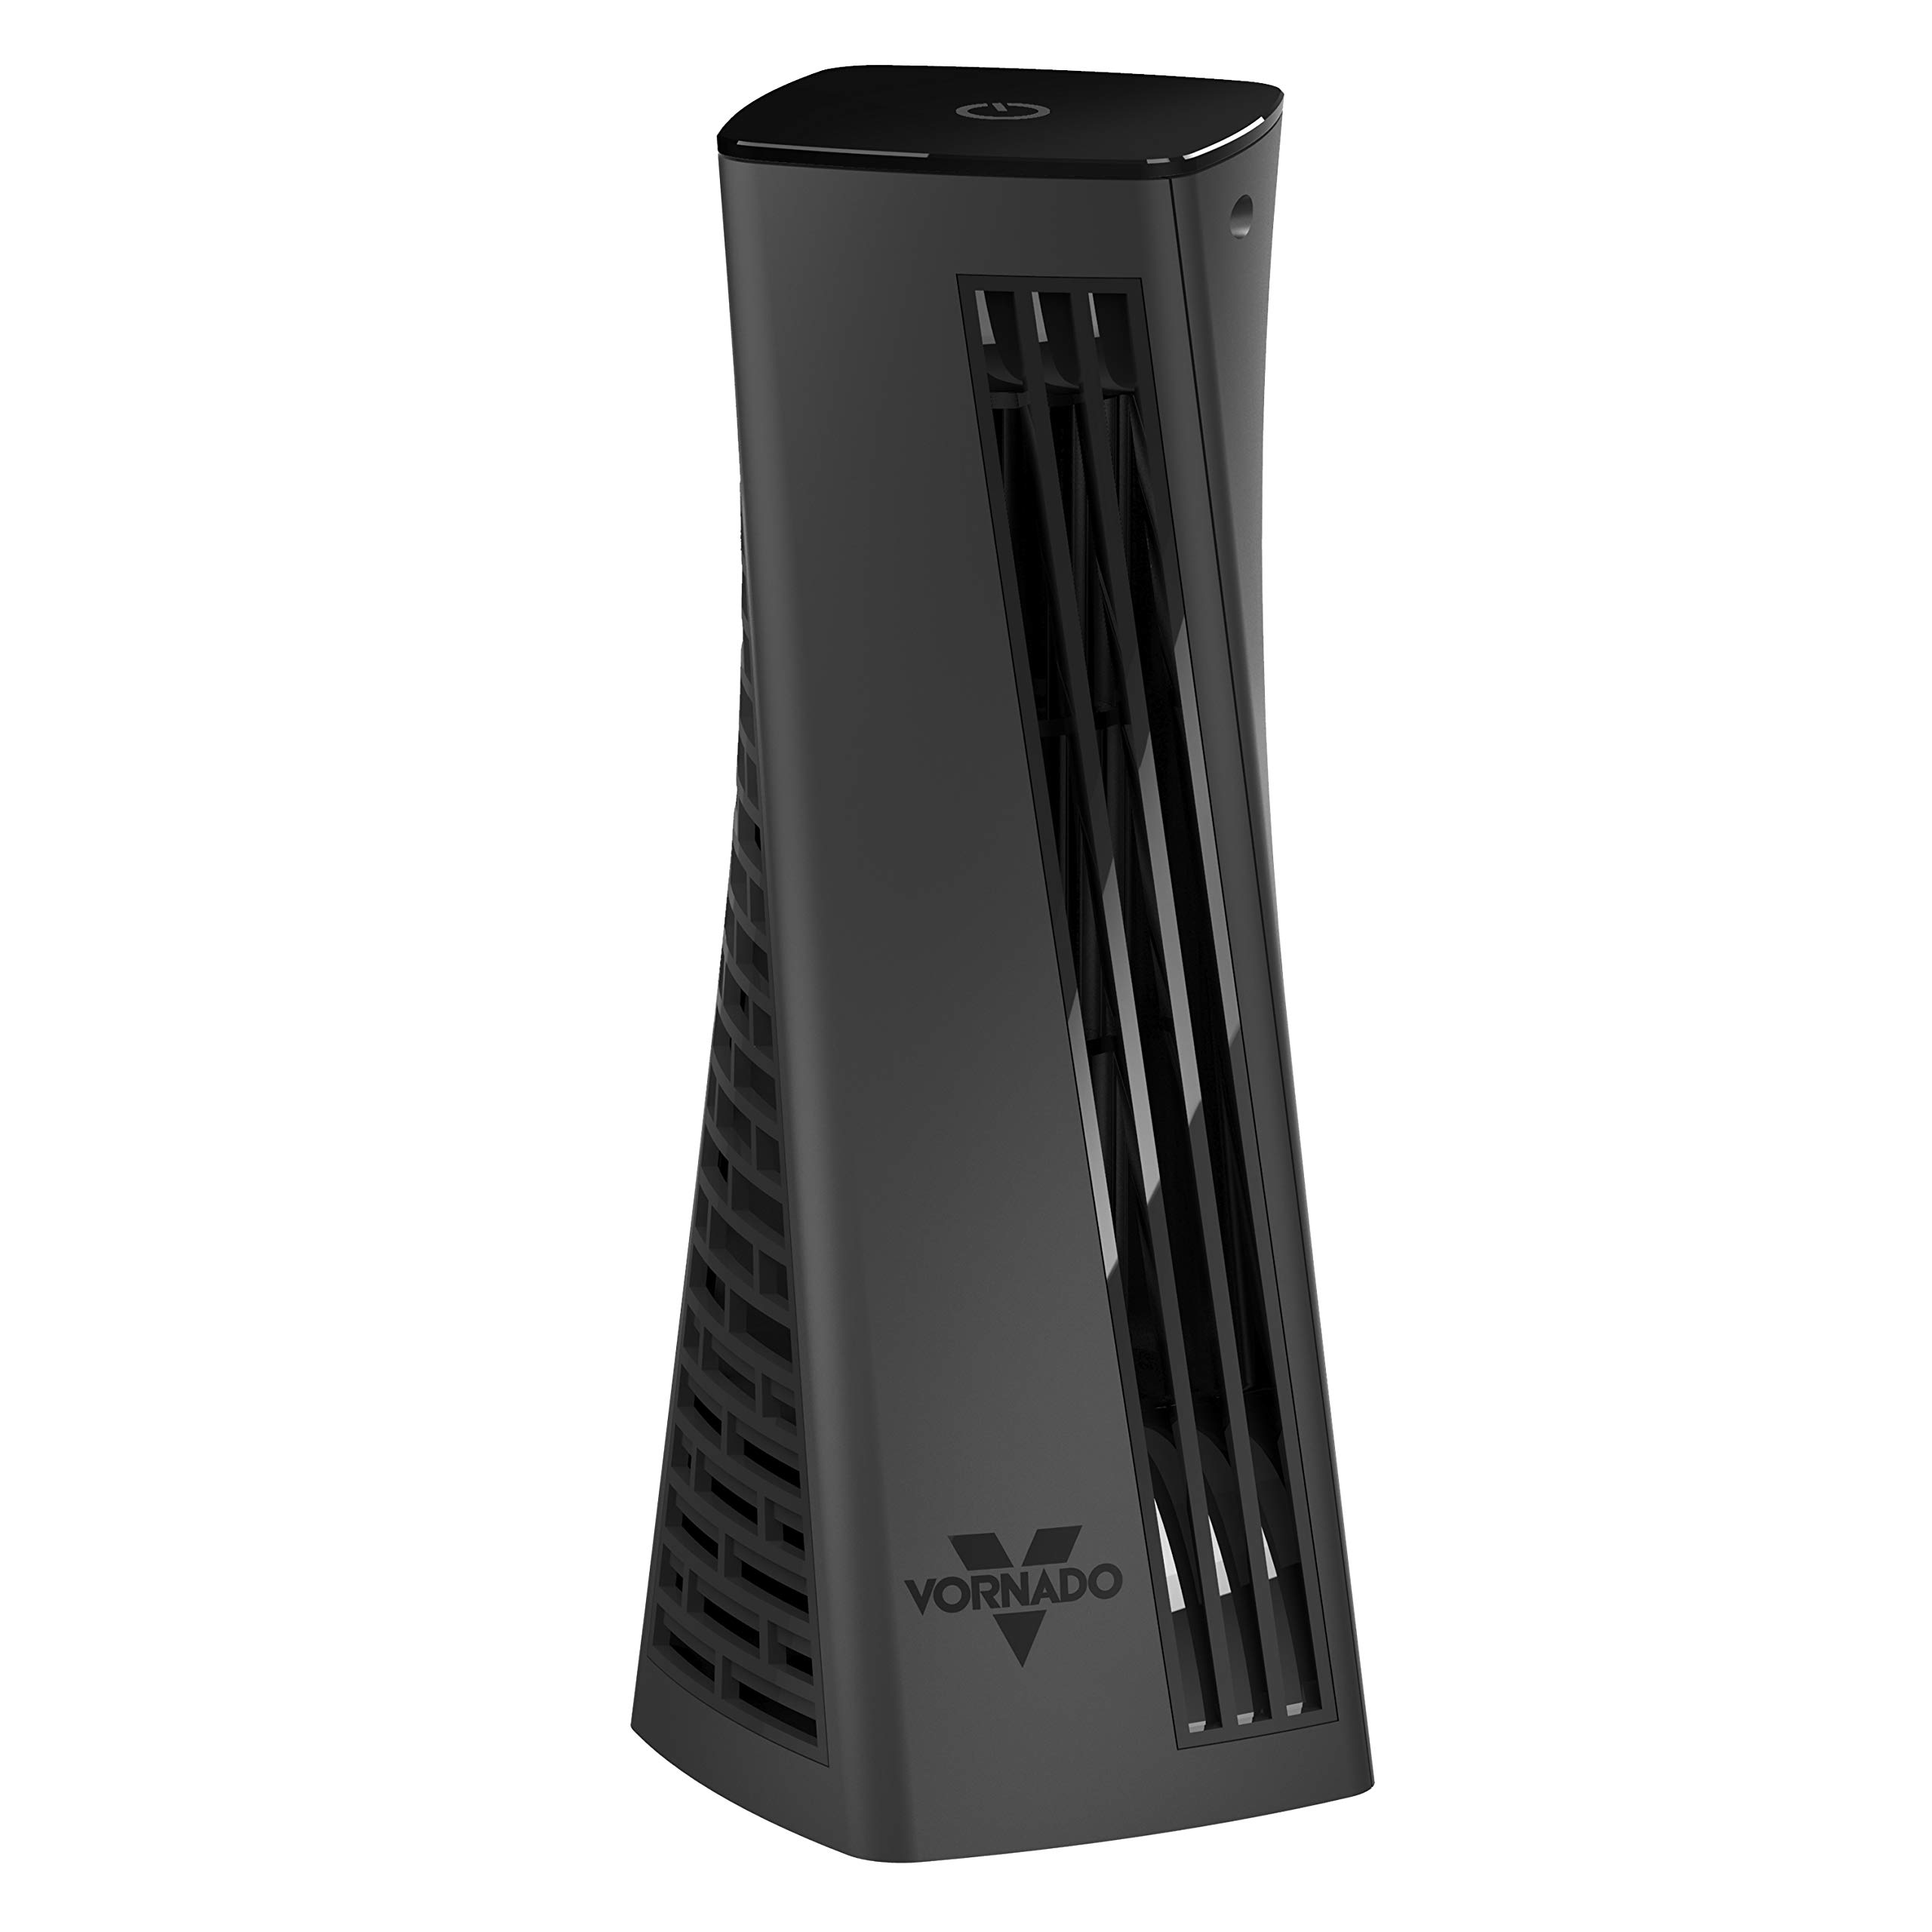 Vornado HELIX1 Personal Tower Fan with 3 Speed Settings, Touch controls, Small Footprint, Black